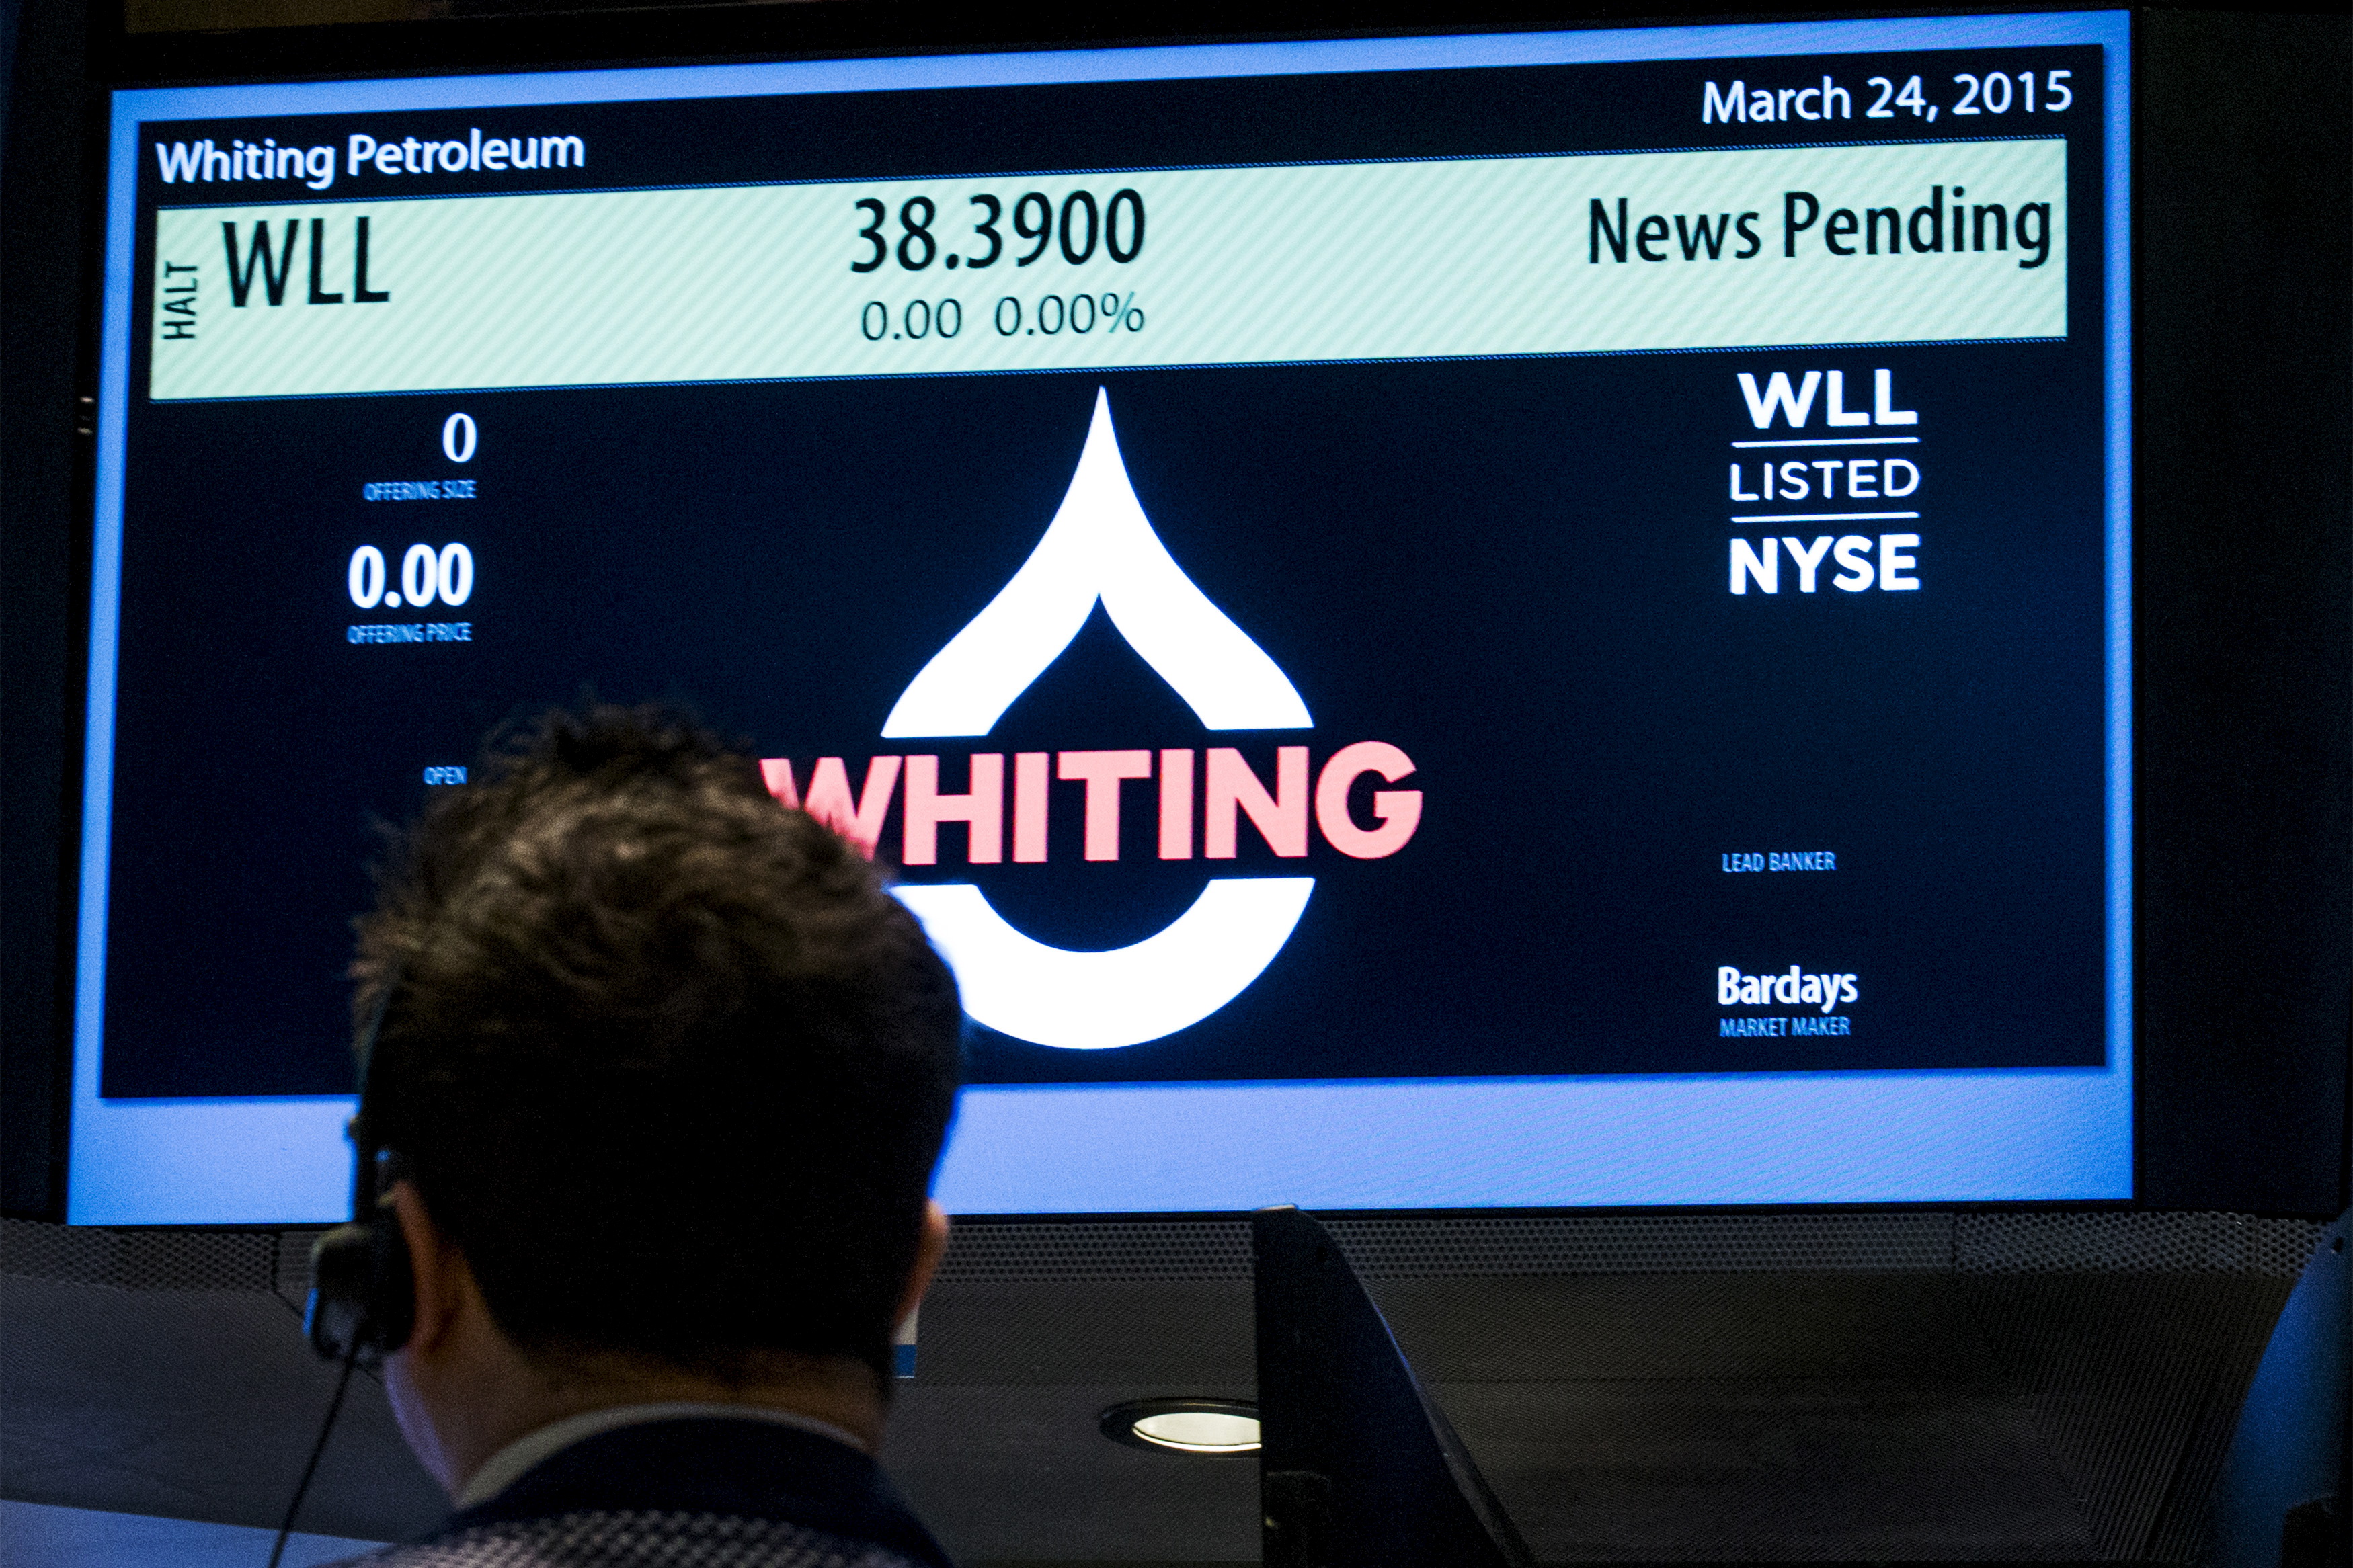 A trader waits for the opening of Whiting Petroleum's stock at the post where it is traded on the floor of the New York Stock Exchange